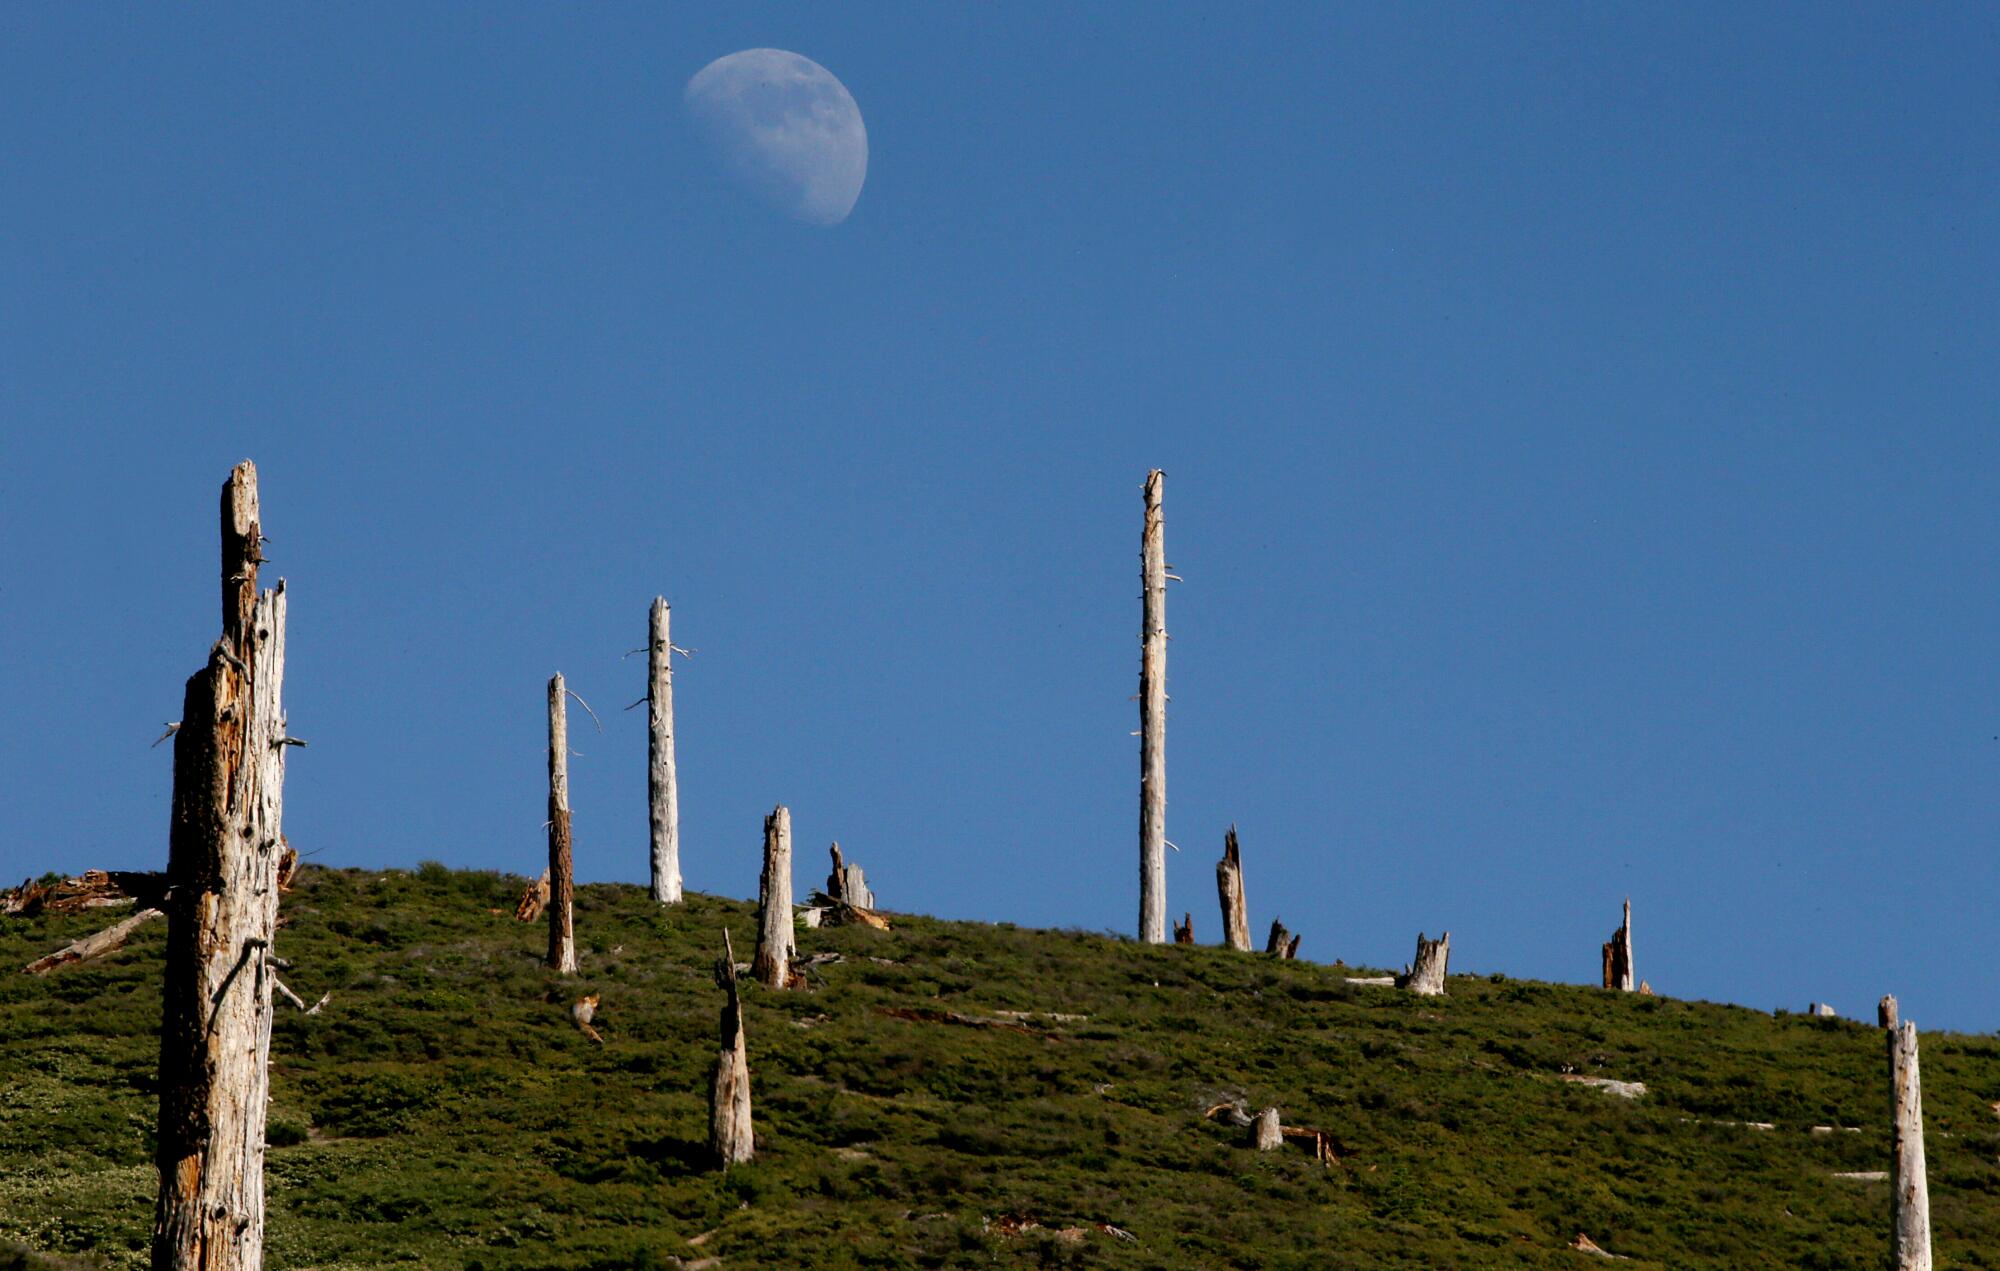 The moon rises over a burn scar left on the landscape by the 1992 Rainbow fire.